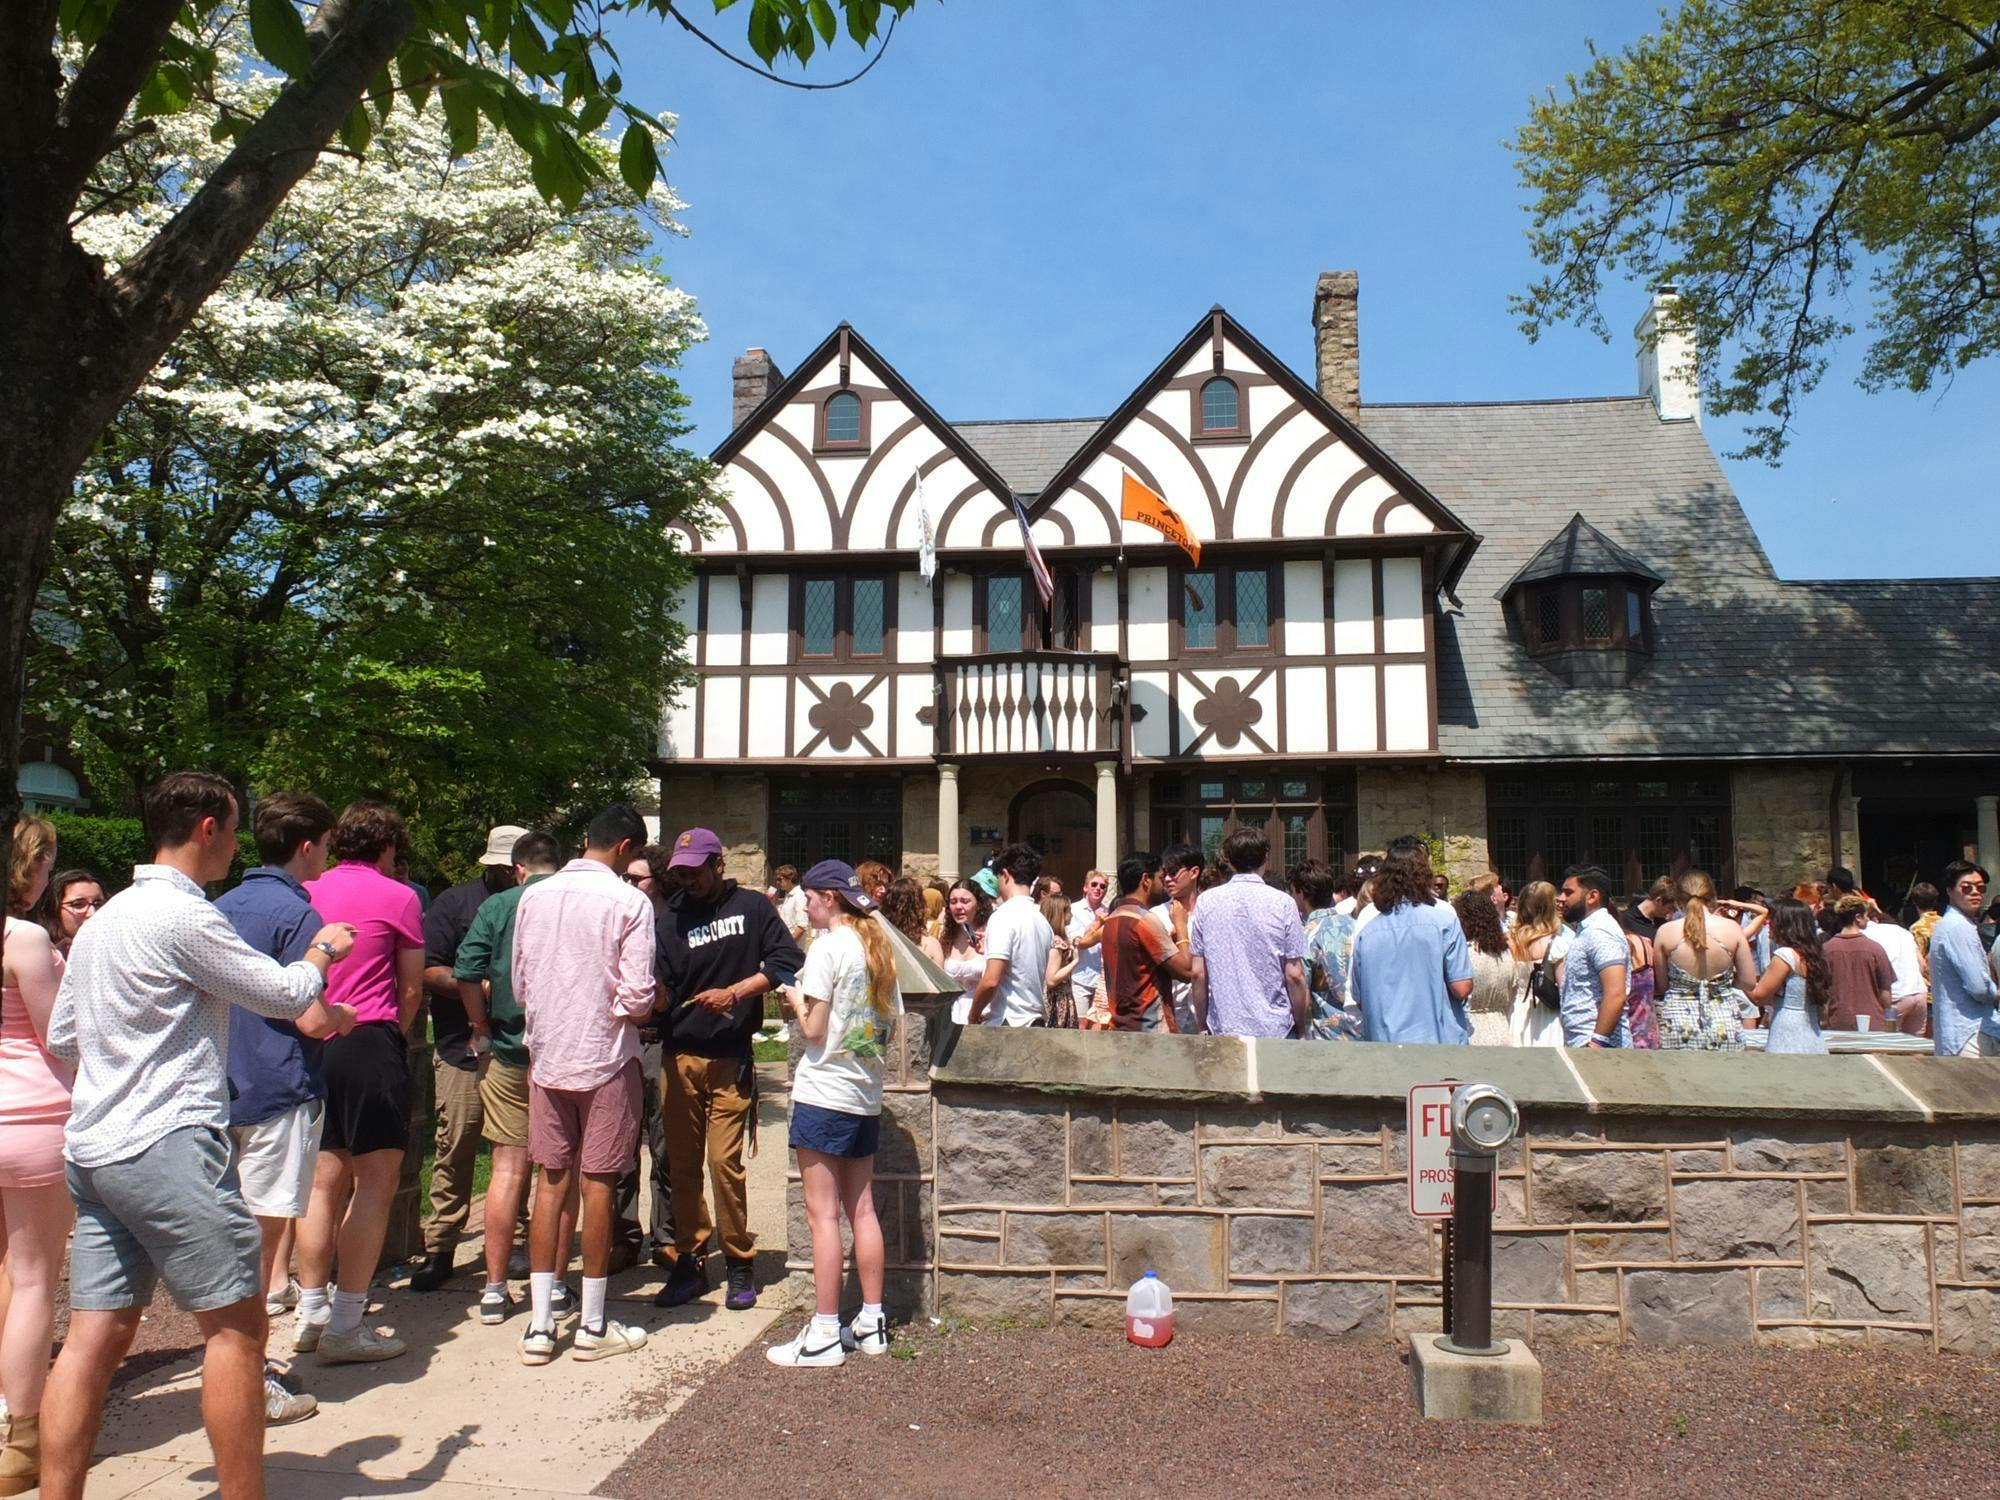 A Tudor-style house overlooks a crowd of people dancing in the front yard. 